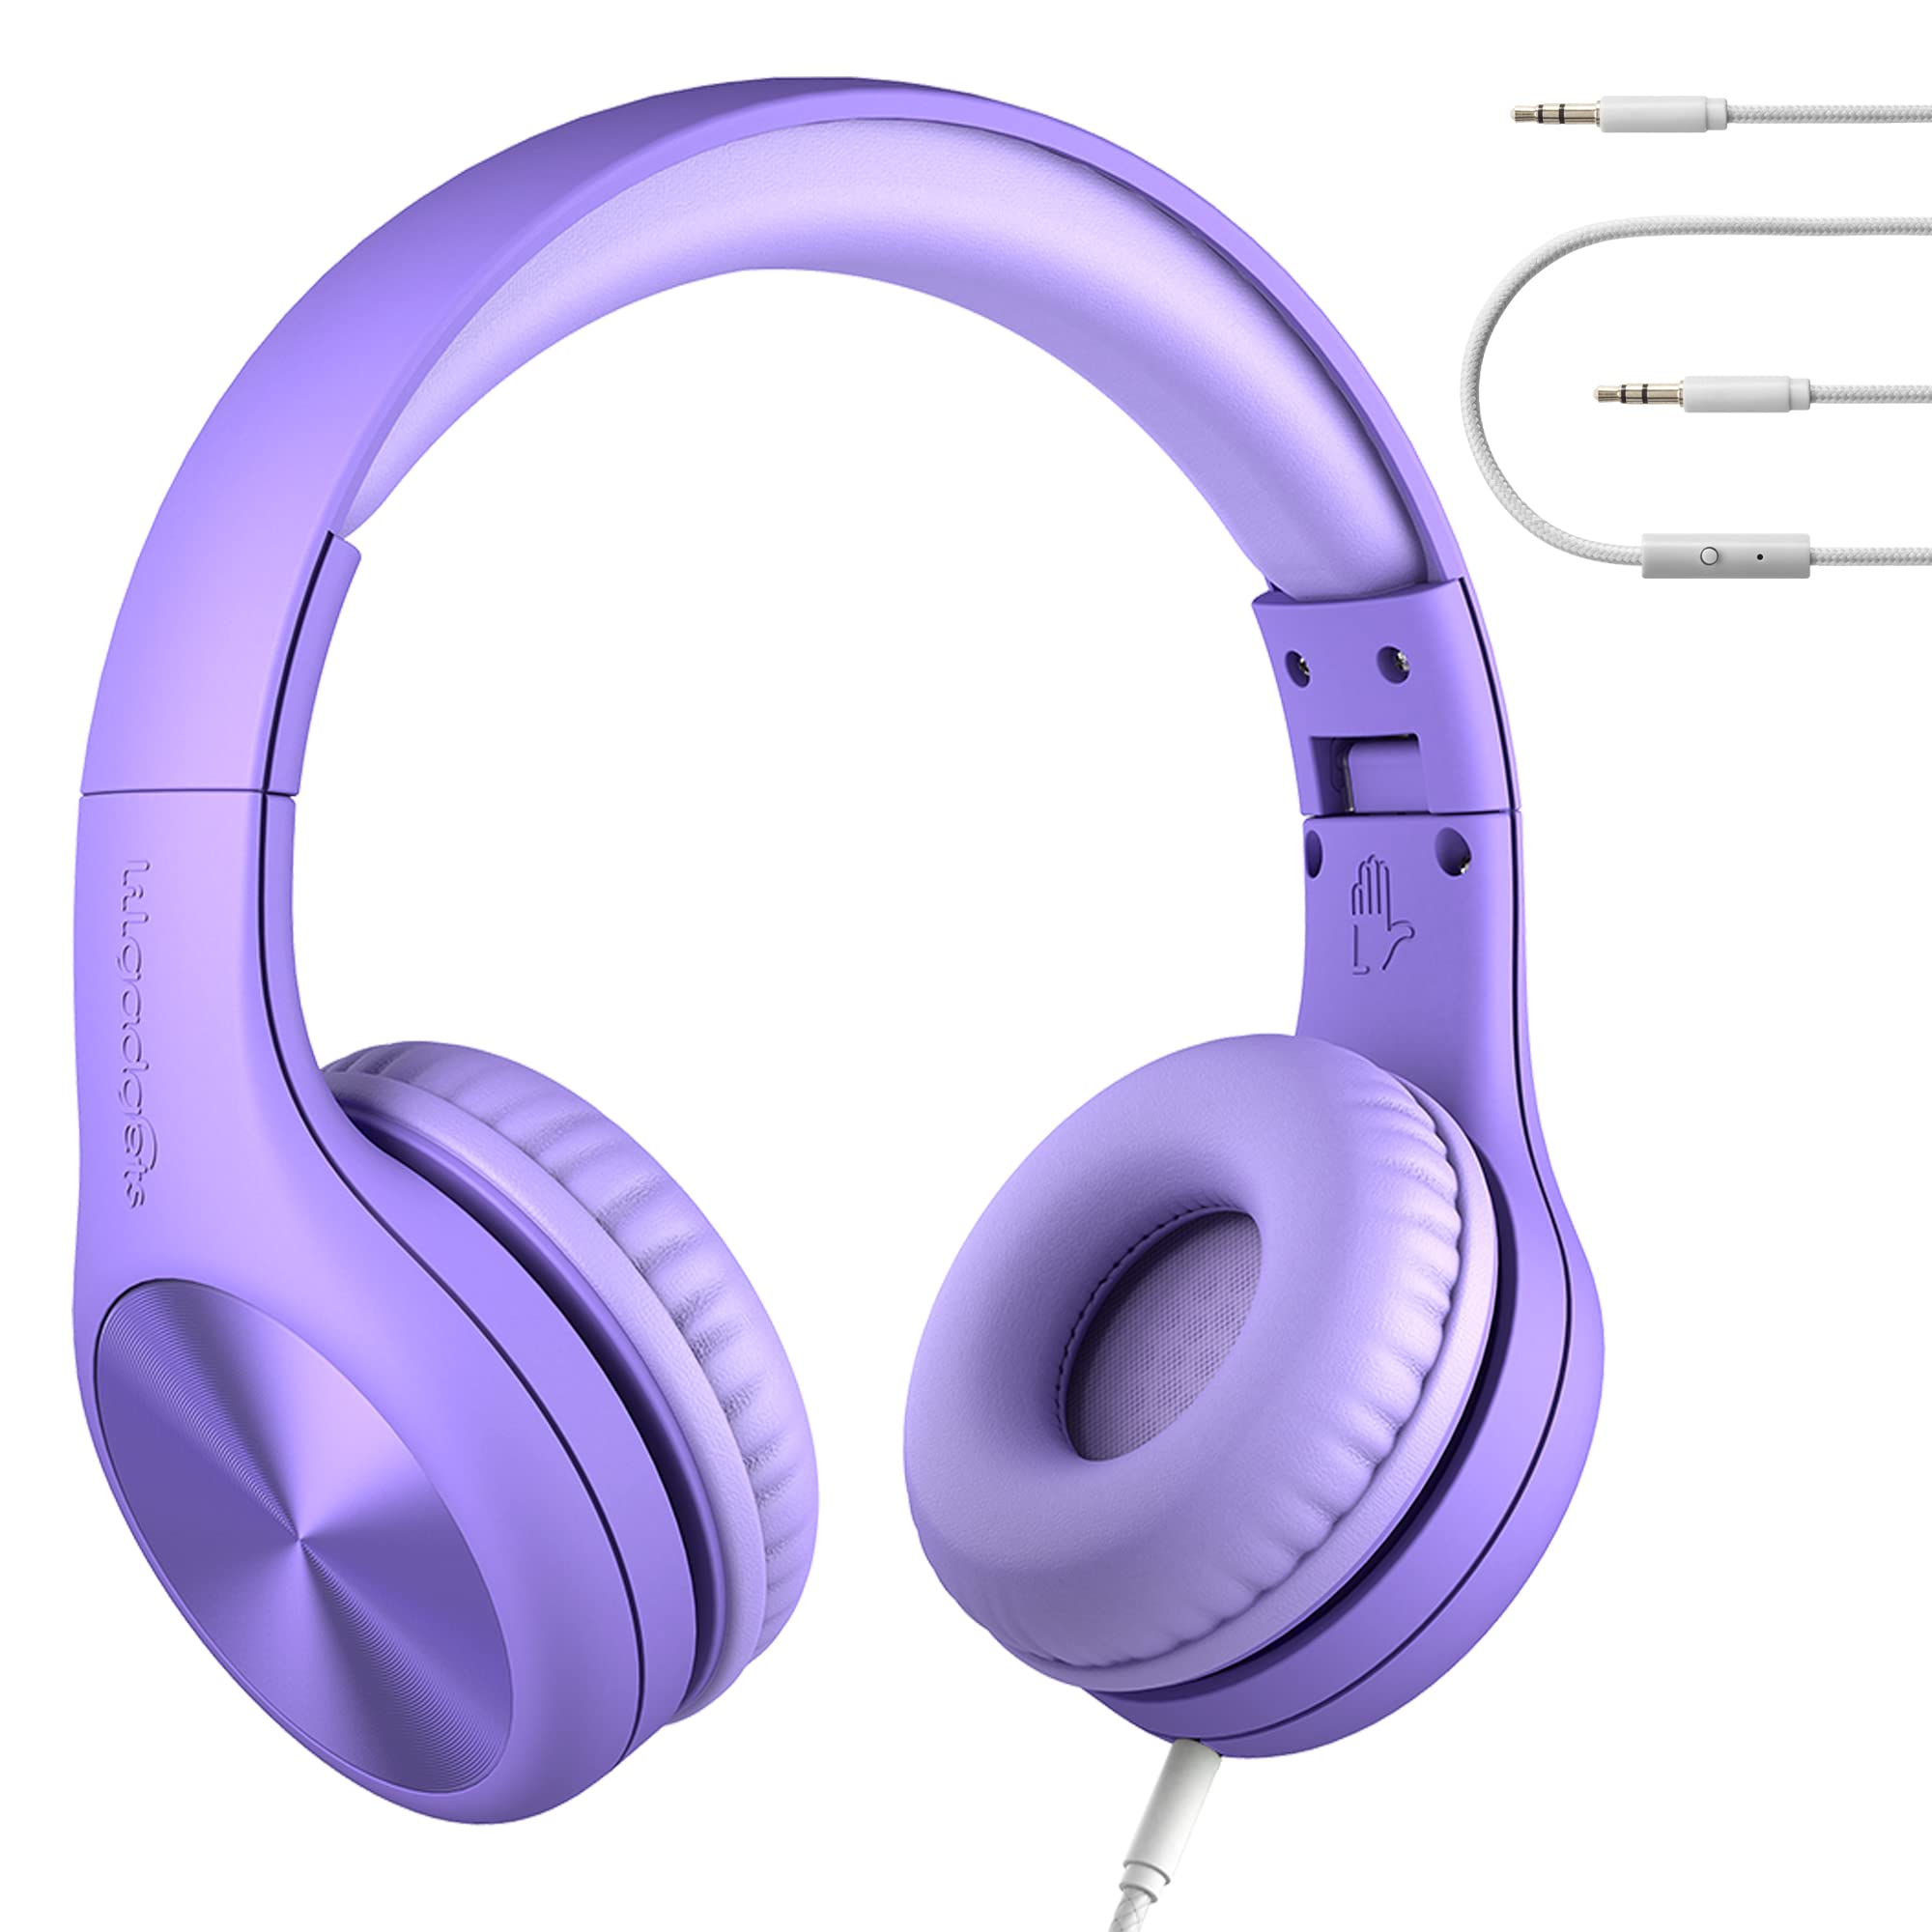 LilGadgets Connect+ Pro Wired Kids Headphones - Designed with Kids' Comfort in Mind, Child-Friendly Foldable Over-Ear Headset with in-line Microphone, Perfect for Toddlers in School, Purple